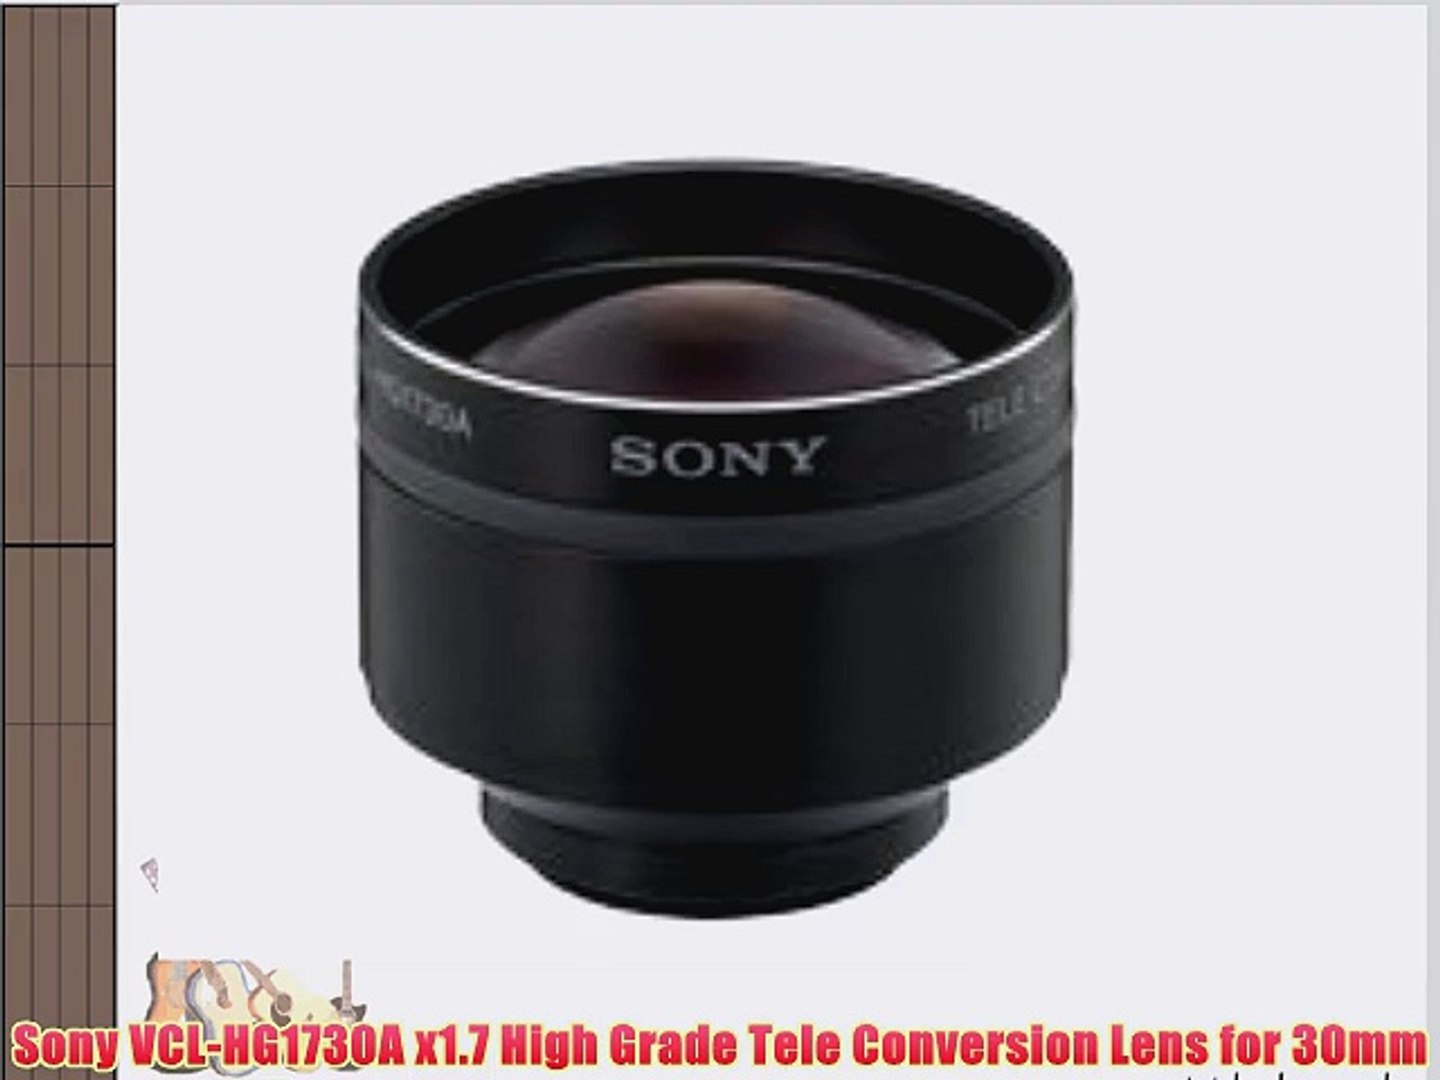 Sony VCL-HG1730A x1.7 High Grade Tele Conversion Lens for 30mm